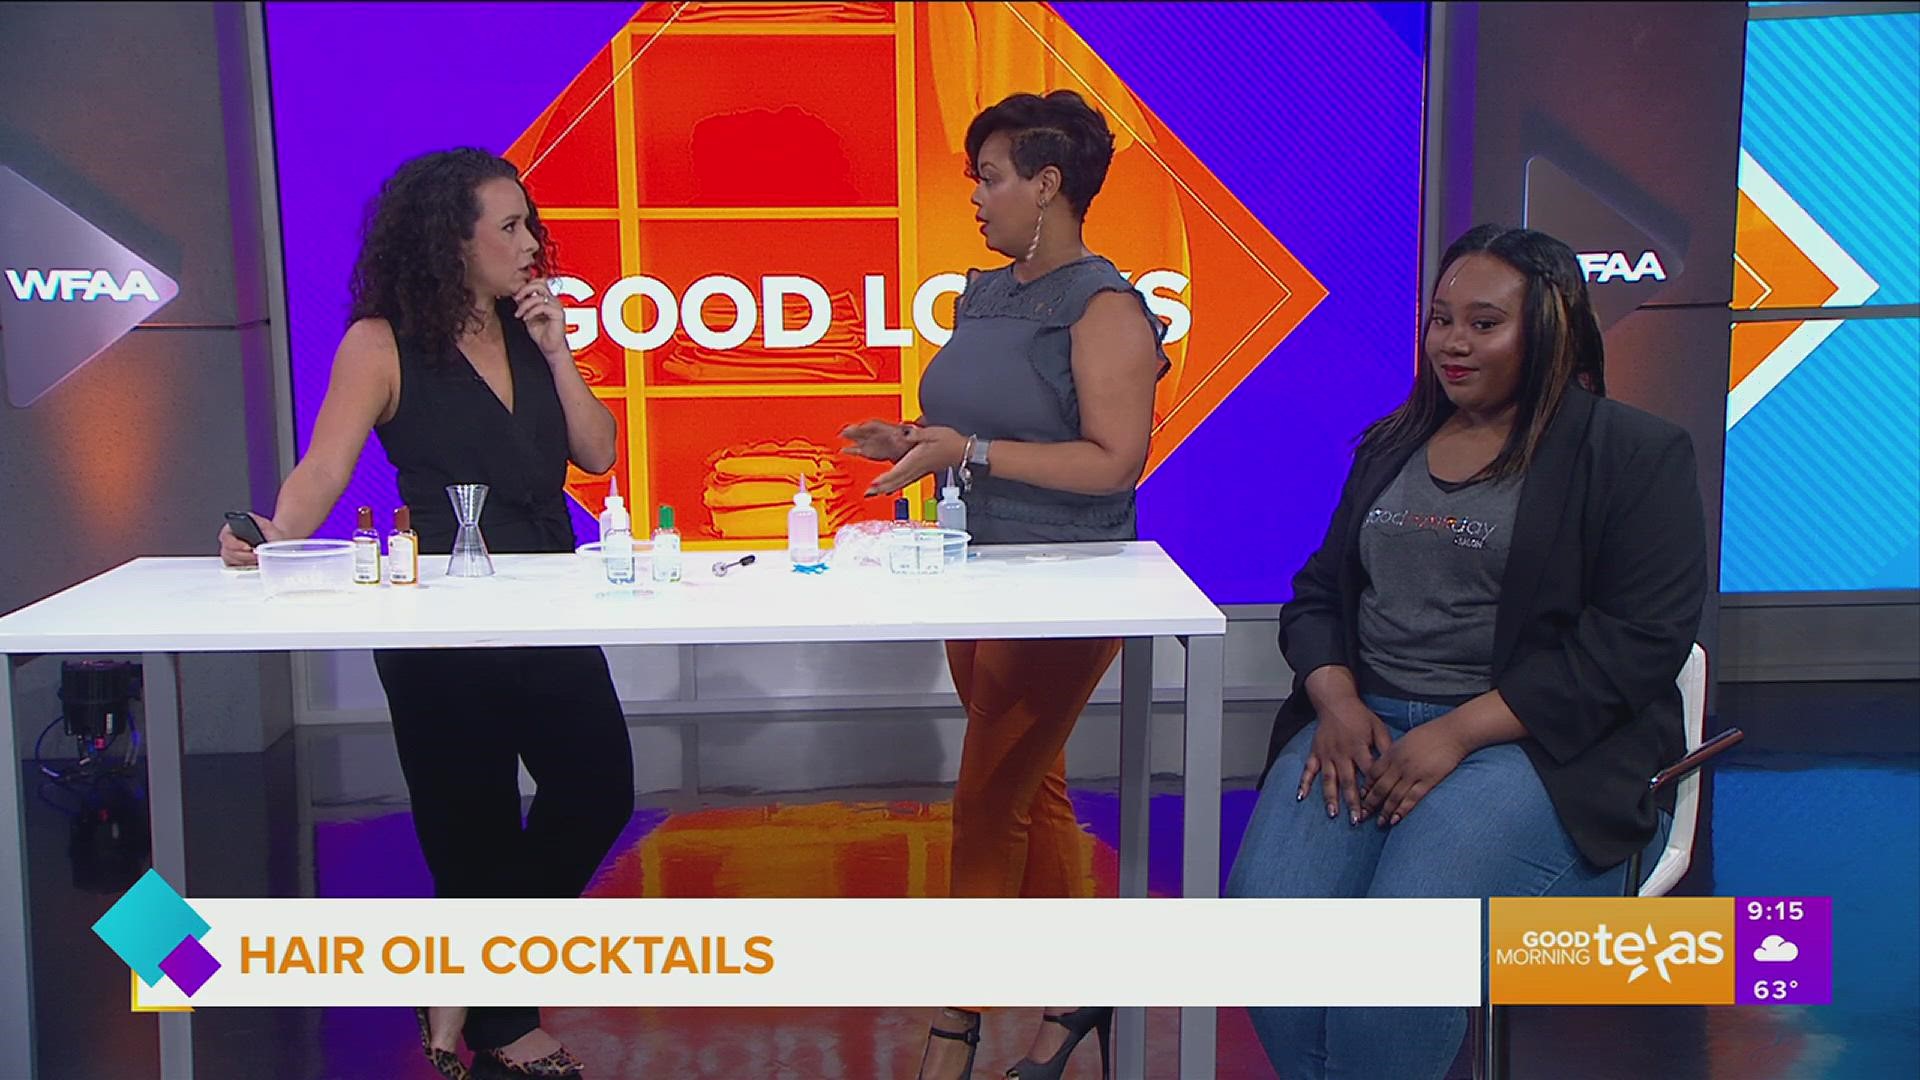 LaTarah Edmond shows us how to mix hair oils at home for hydration, damage and all hair types. Go to goodhairday.net for more information.